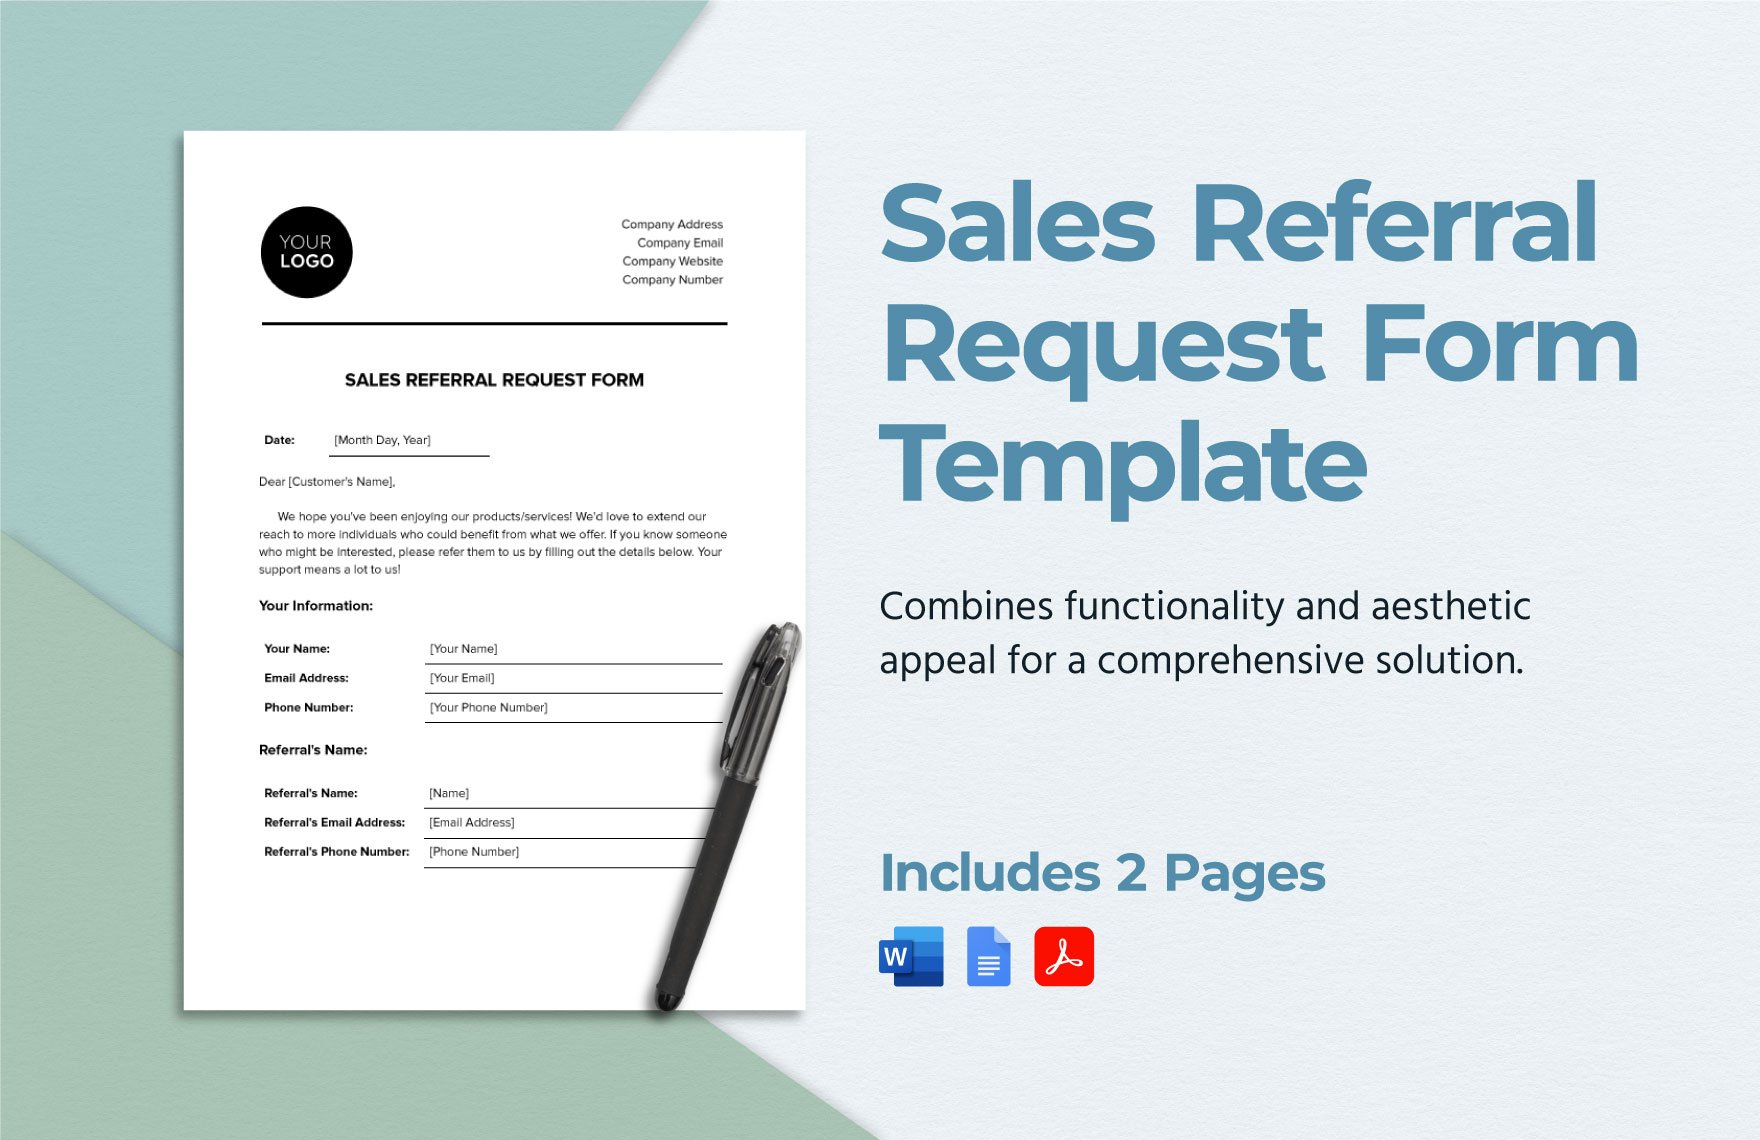 Sales Referral Request Form Template in Word, Google Docs, PDF